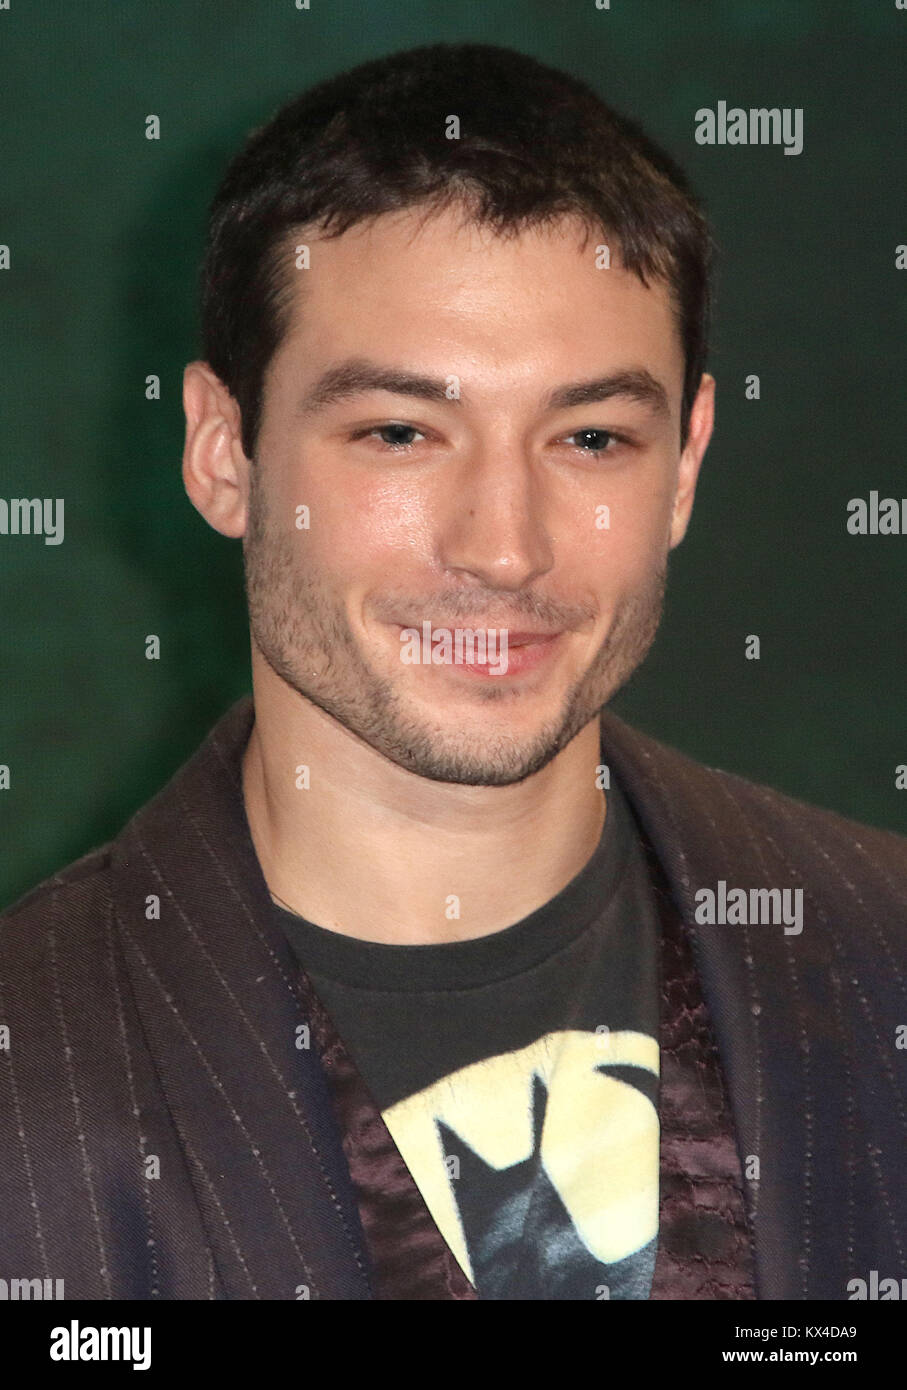 Nov 04, 2017 - Ezra Miller attending 'Justice League' Photocall, The College, Southampton Row in London, England, UK Stock Photo